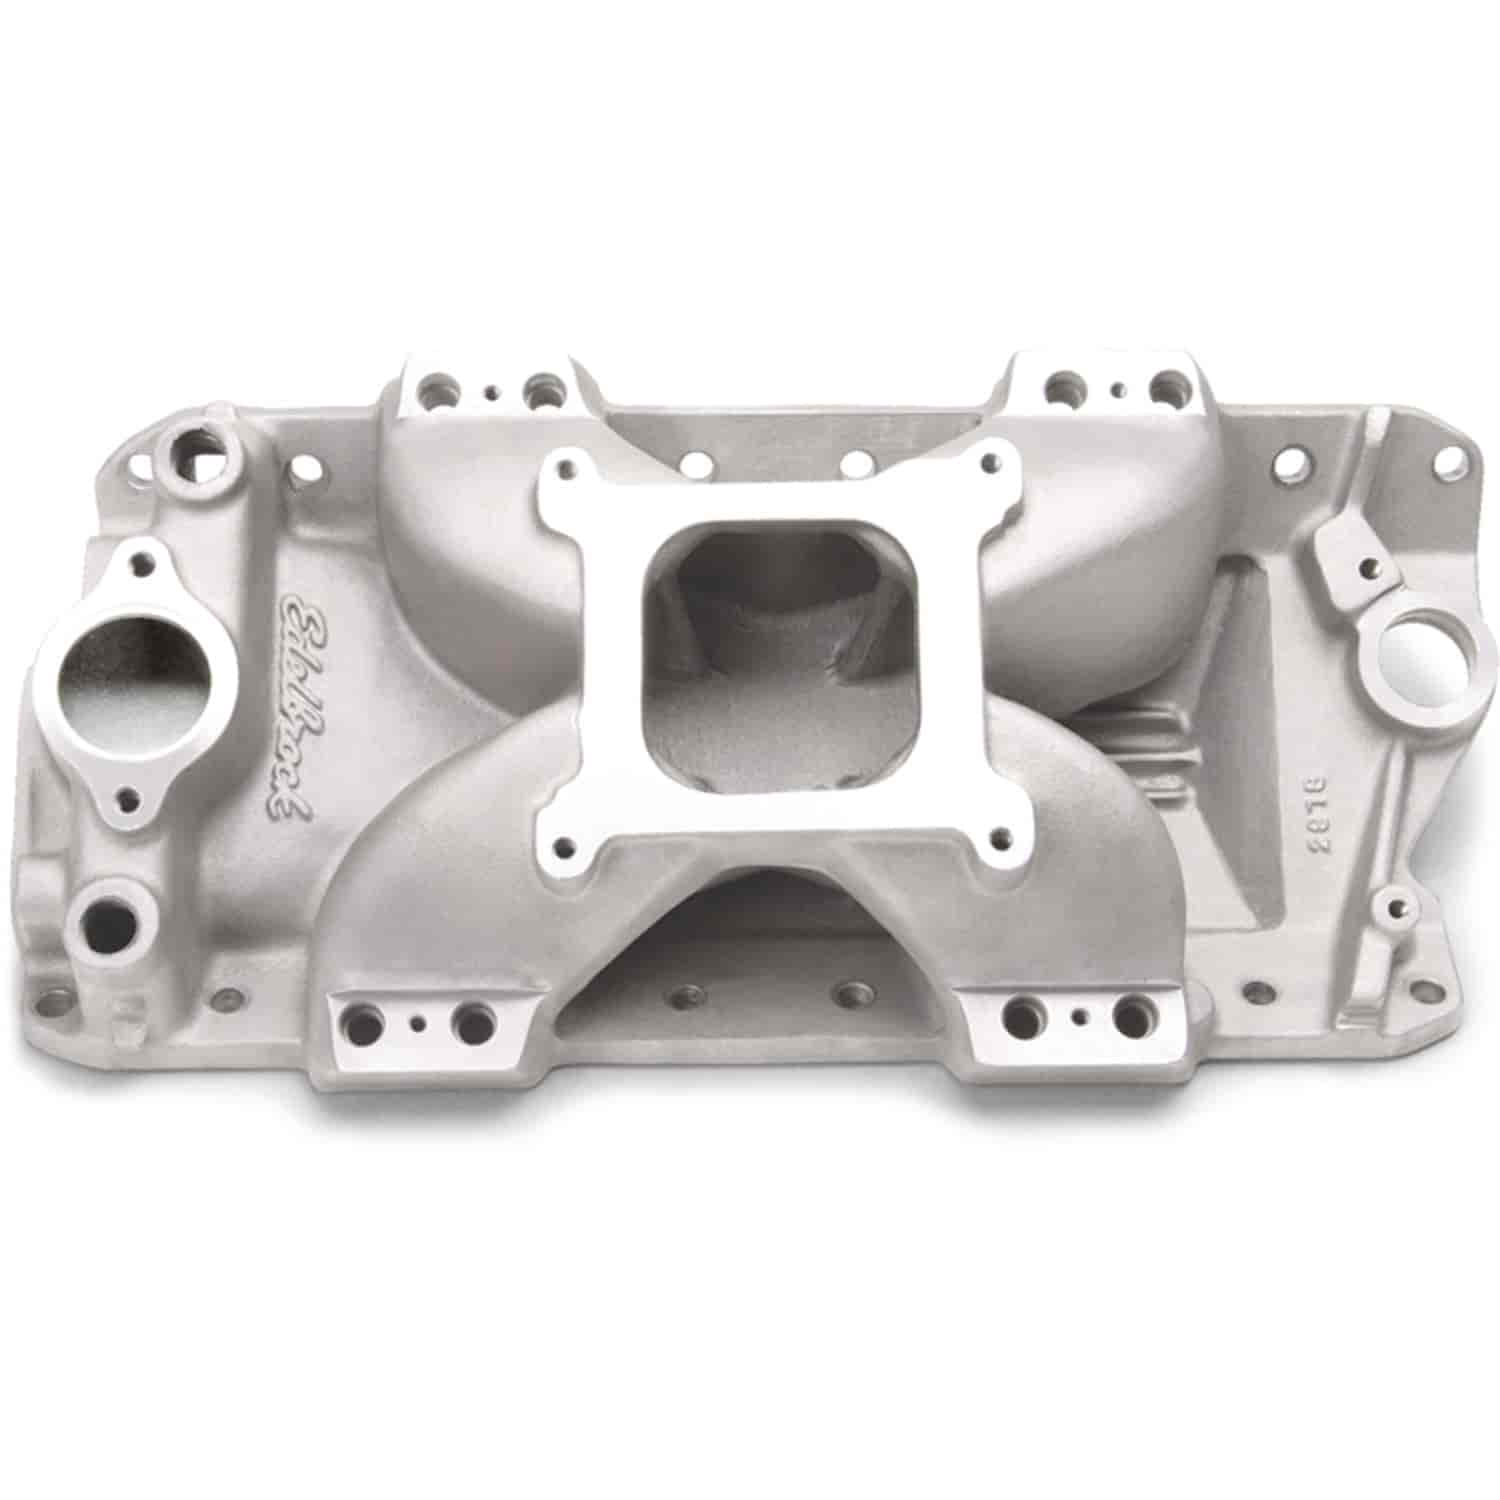 Victor E 23° EFI Intake Manifold for Small Block Chevy